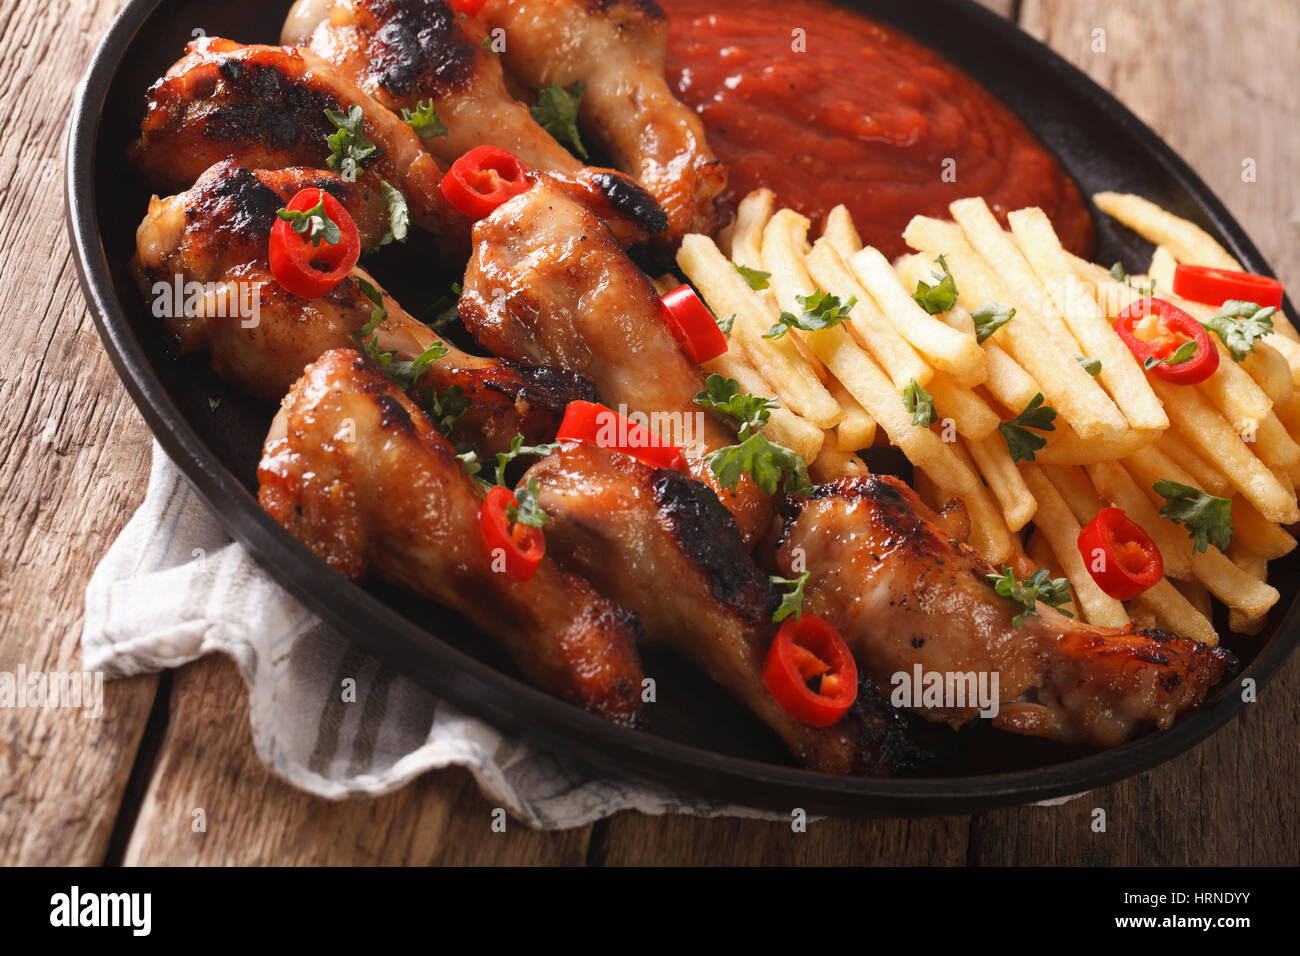 Spicy BBQ chicken wings with french fries and sauce on a plate close-up. horizontal Stock Photo